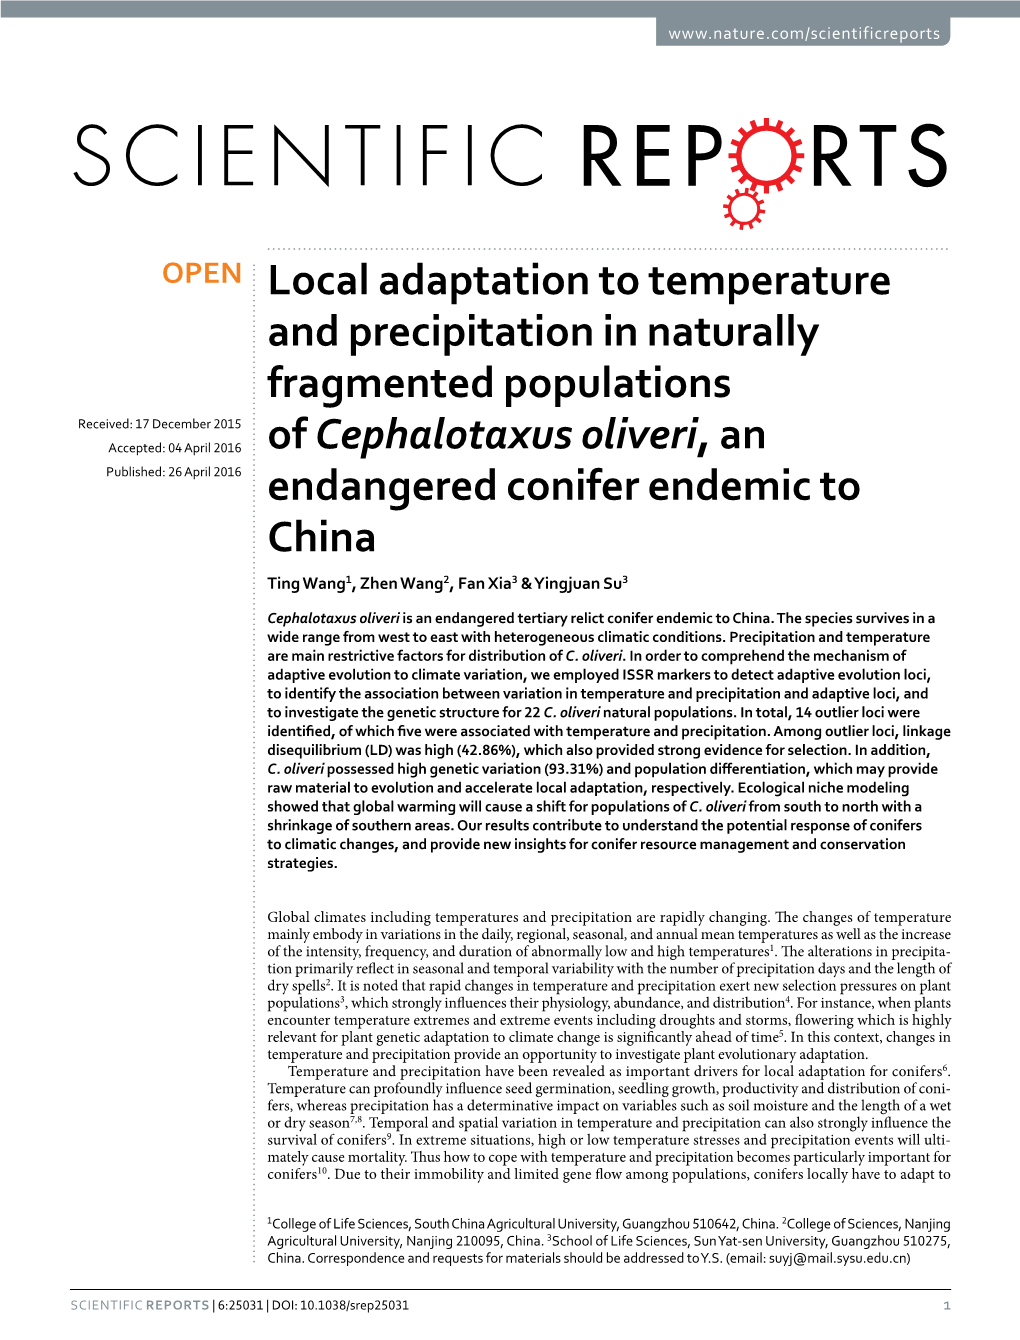 Local Adaptation to Temperature and Precipitation in Naturally Fragmented